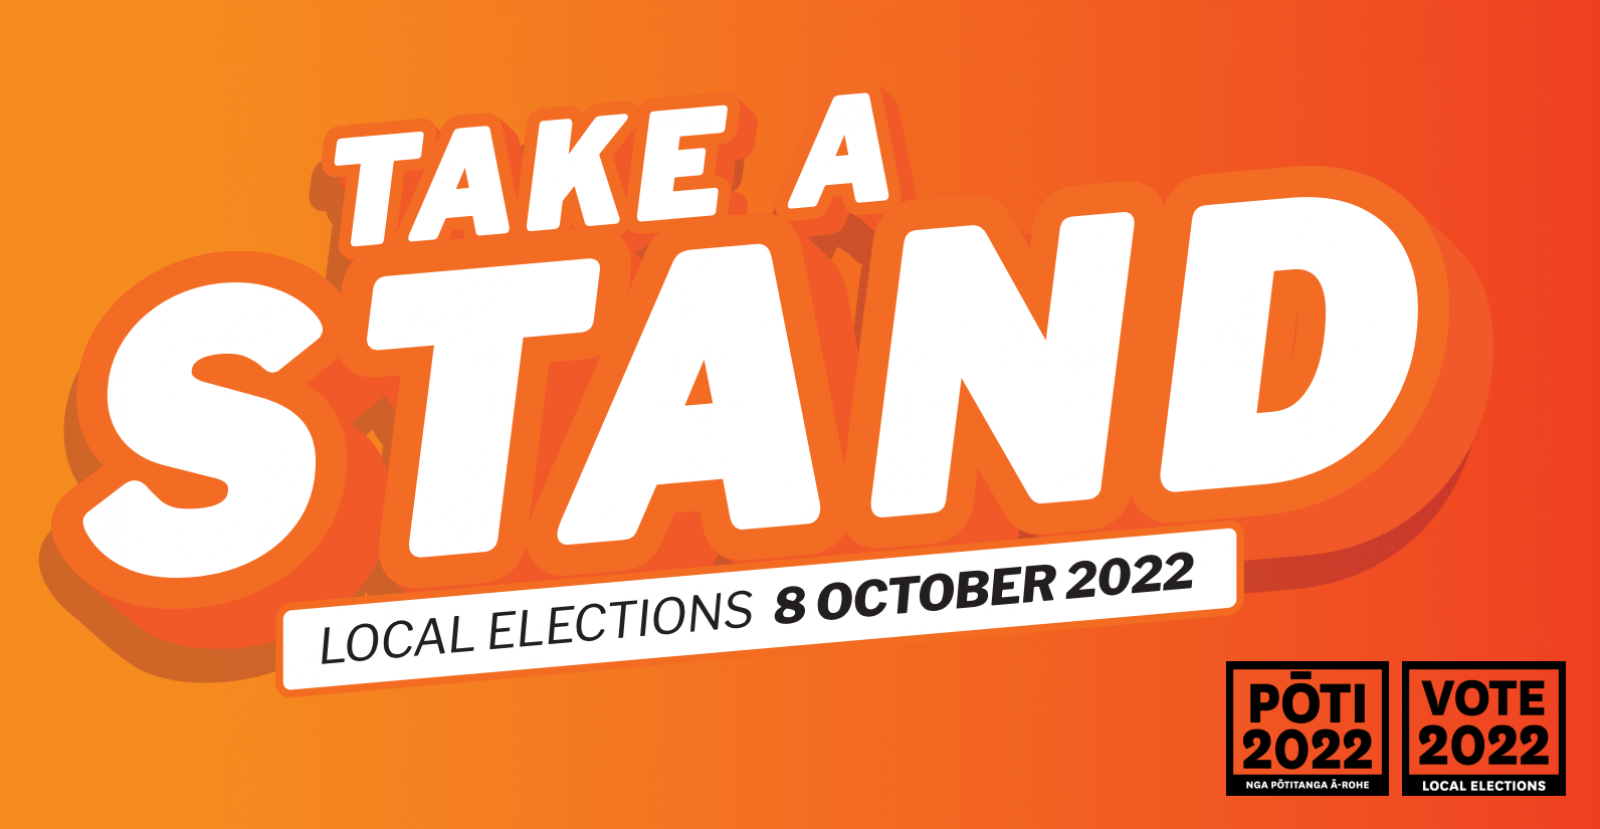 Elections - Take a stand banner image